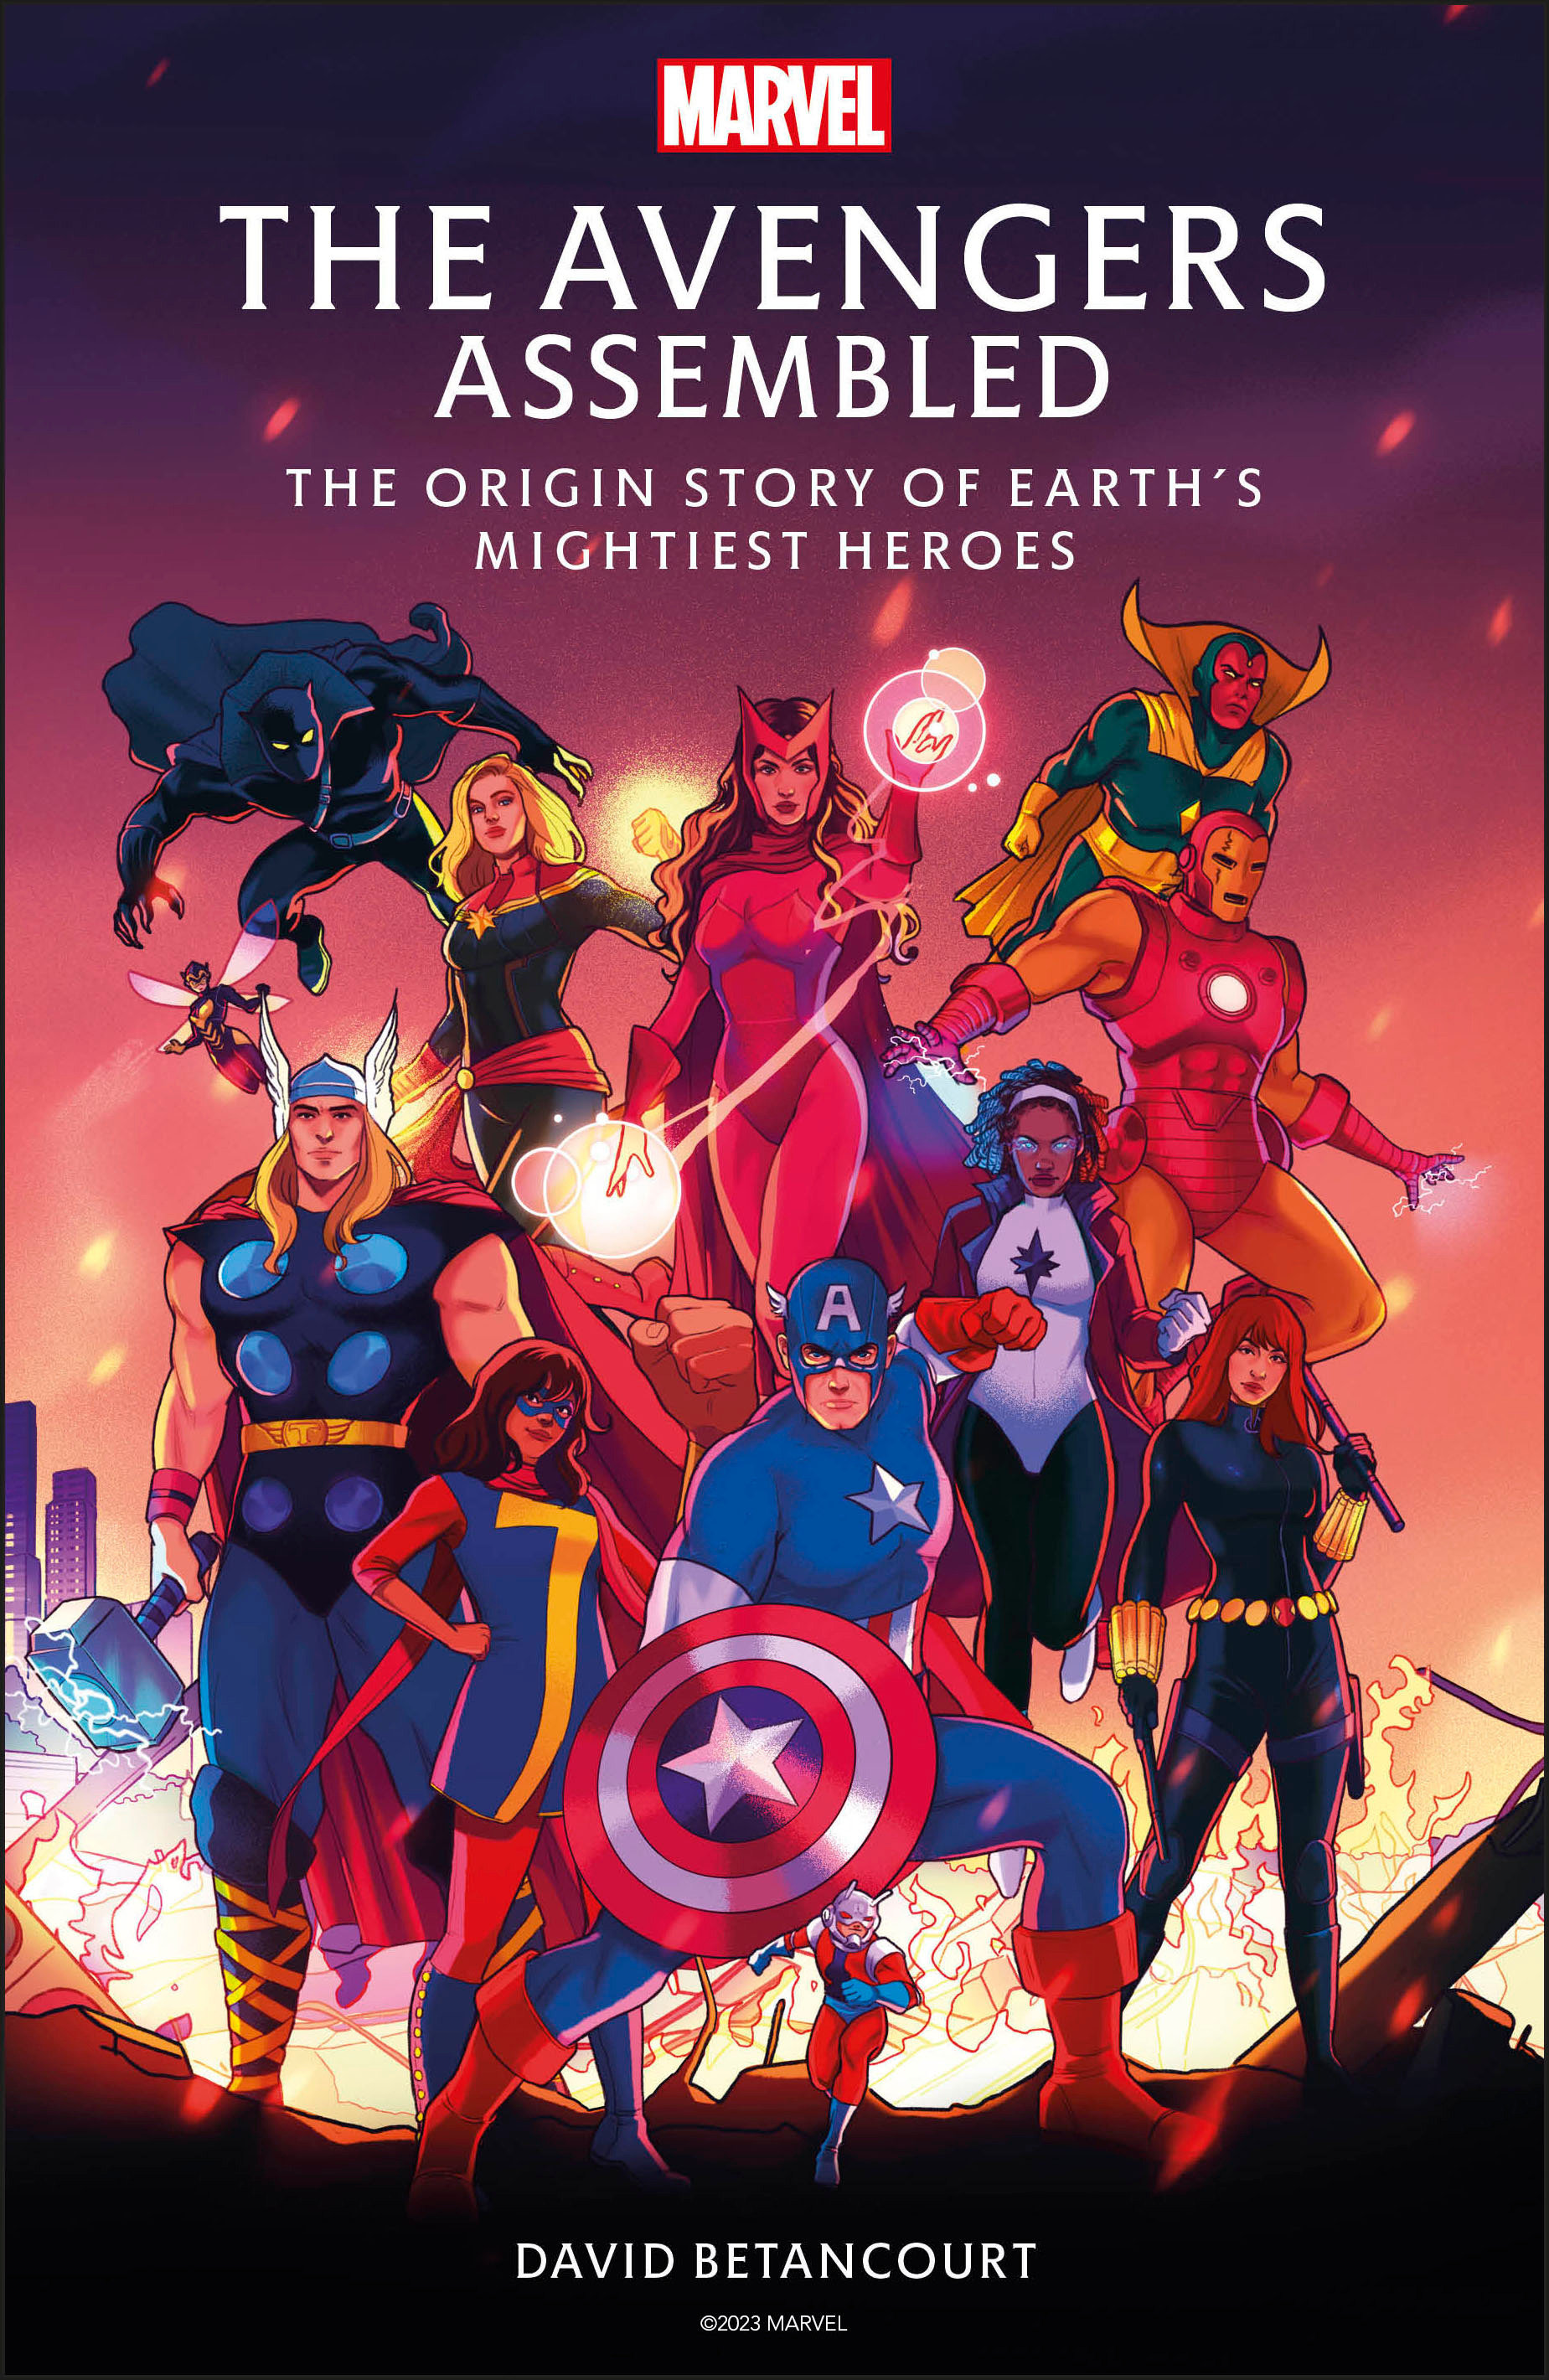 The Avengers Assembled: The Origin Story of Earth’s Mightiest Heroes Hardcover